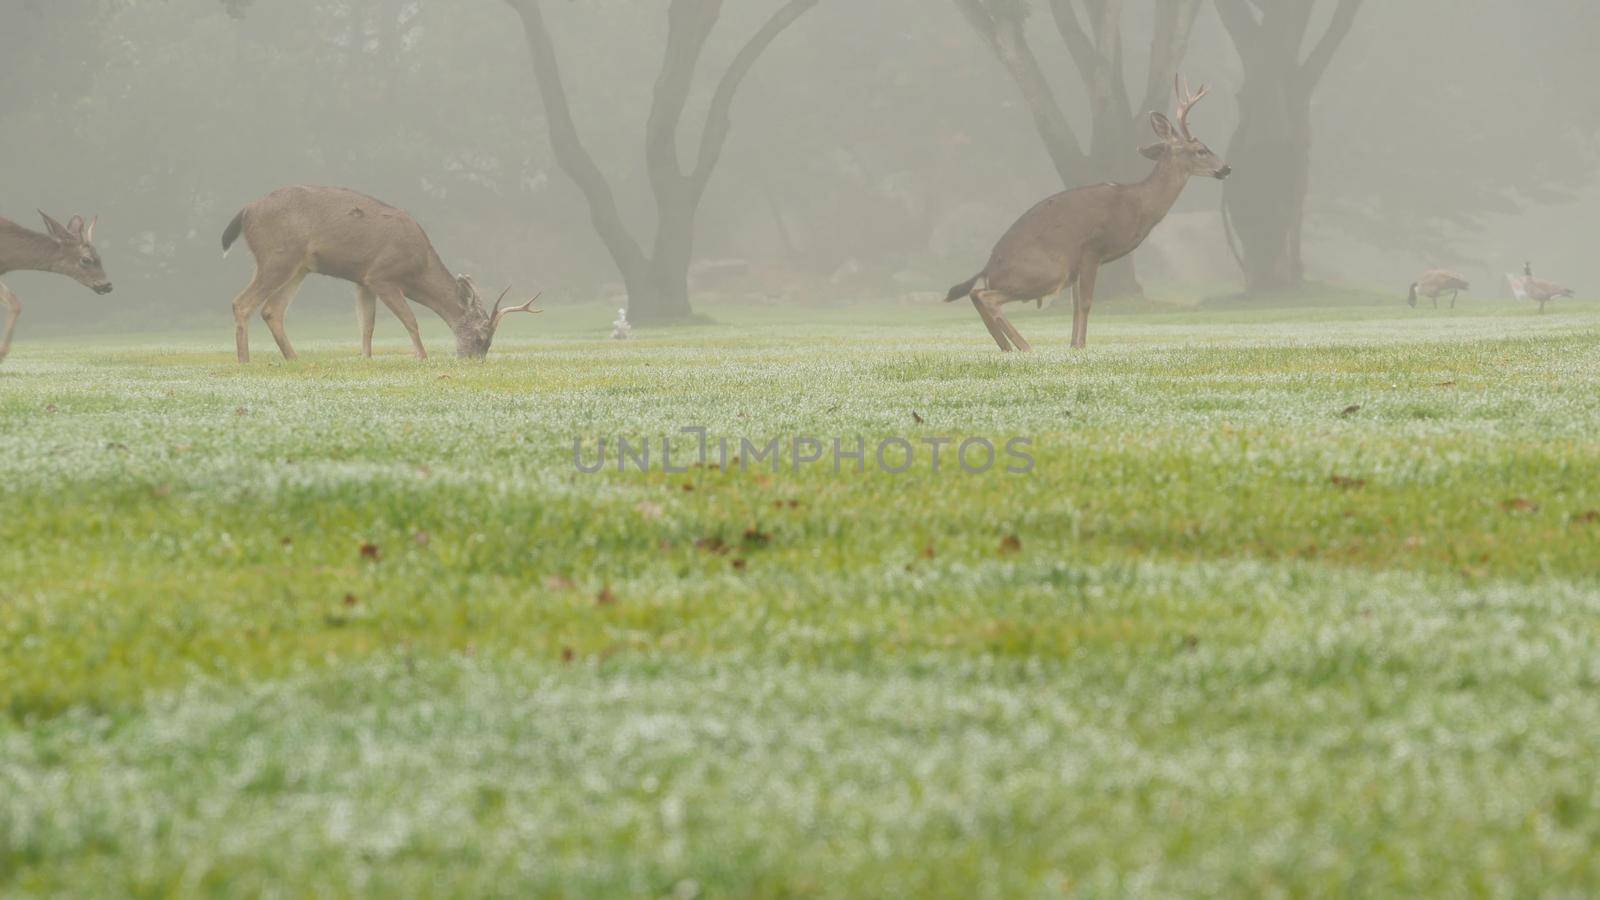 Wild deer defecating or peeing while grazing on green lawn, foggy forest trees. Young animal pooping or pissing on grass. Mammal defecation in nature. Digestive system. Funny pose or comic posture.